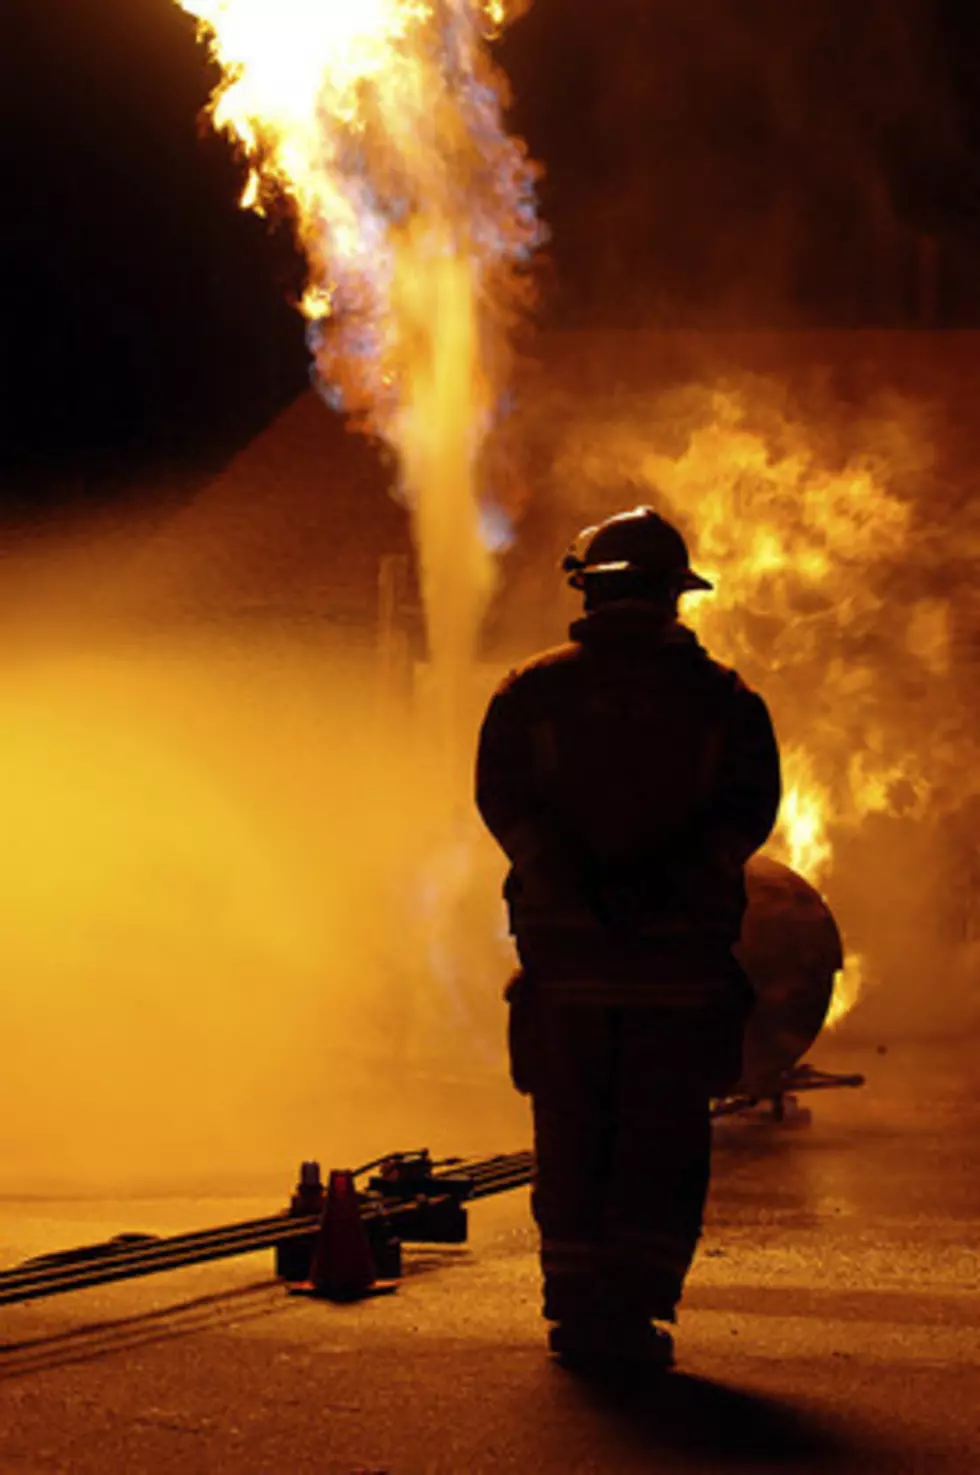 Committee Endorses Bill to Recognize Firefighters’ Cancer